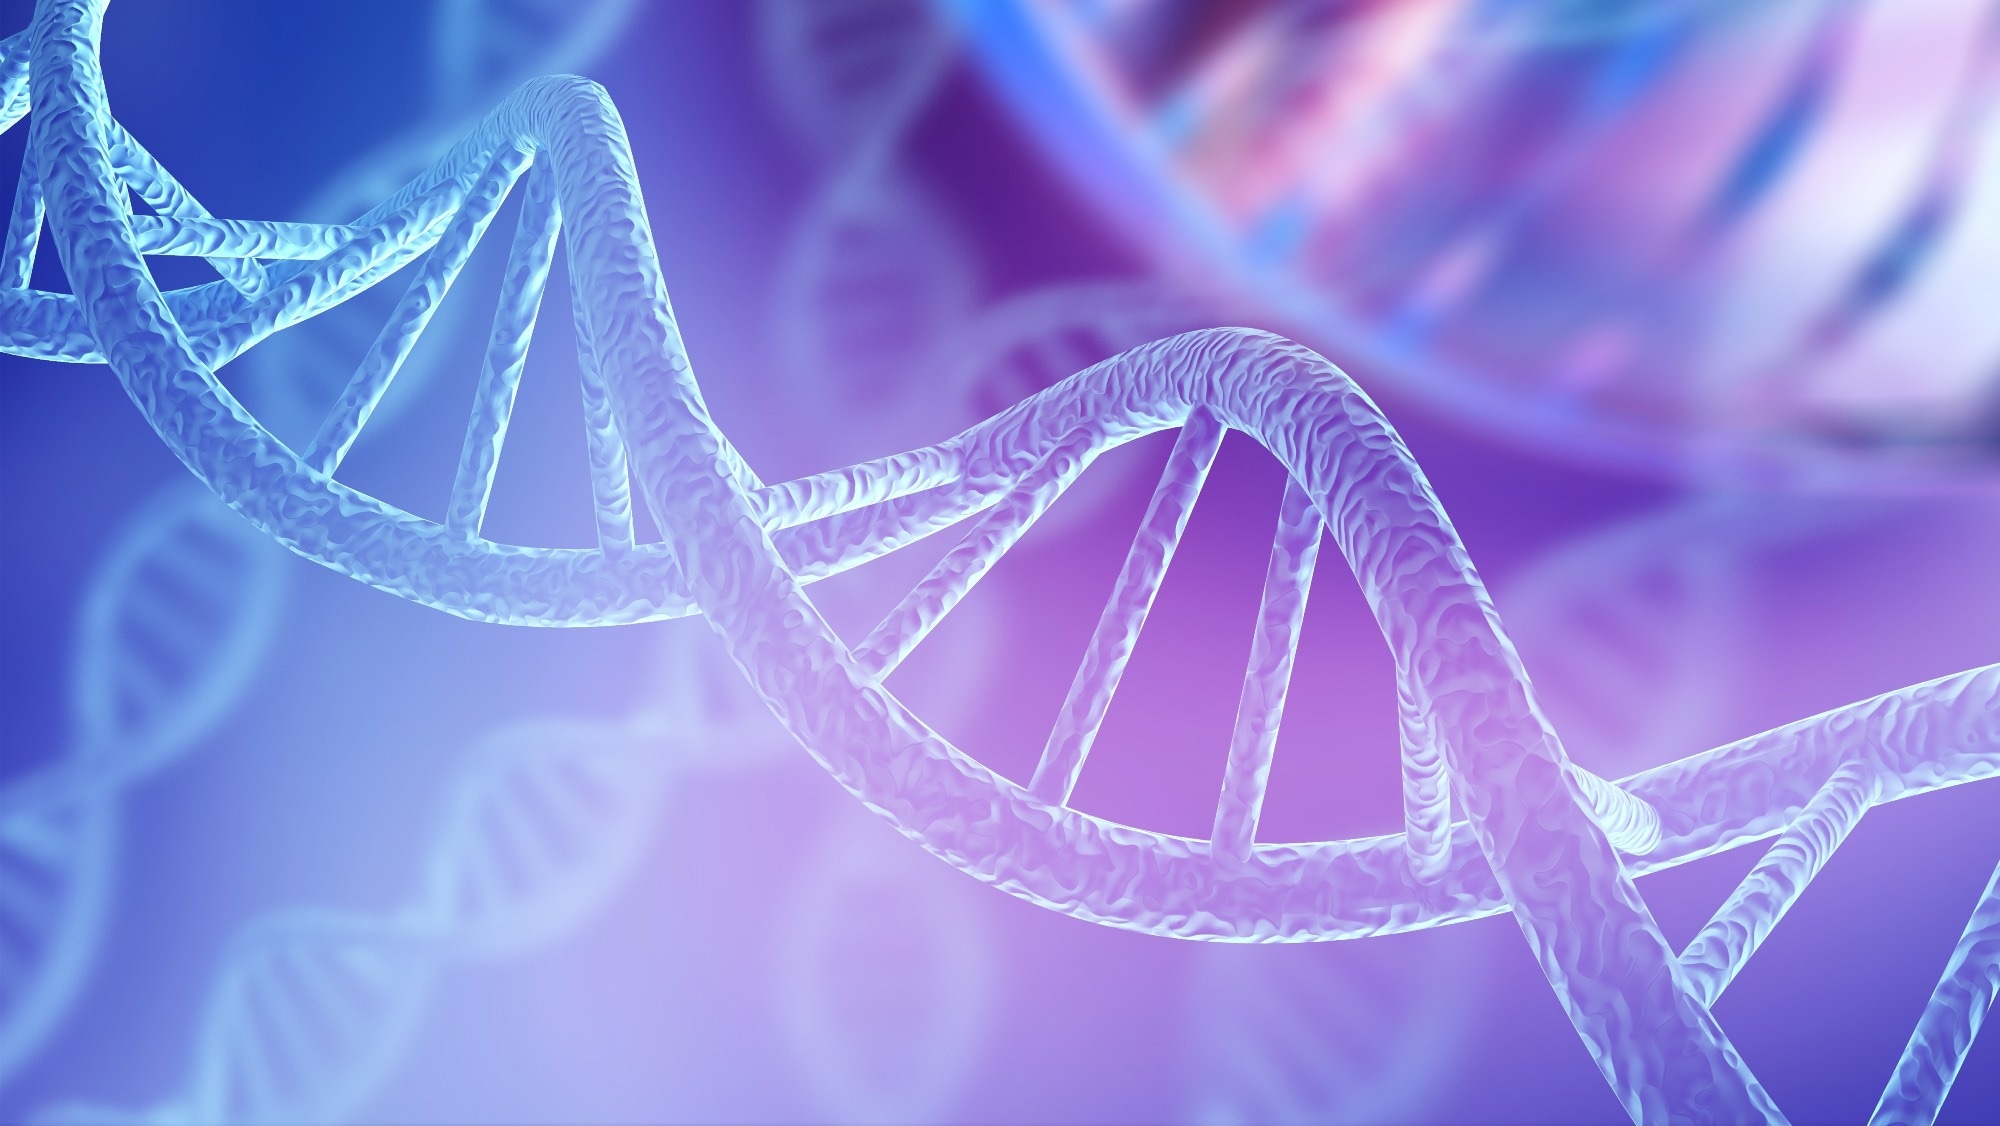 4k Dna Stock Video Footage for Free Download